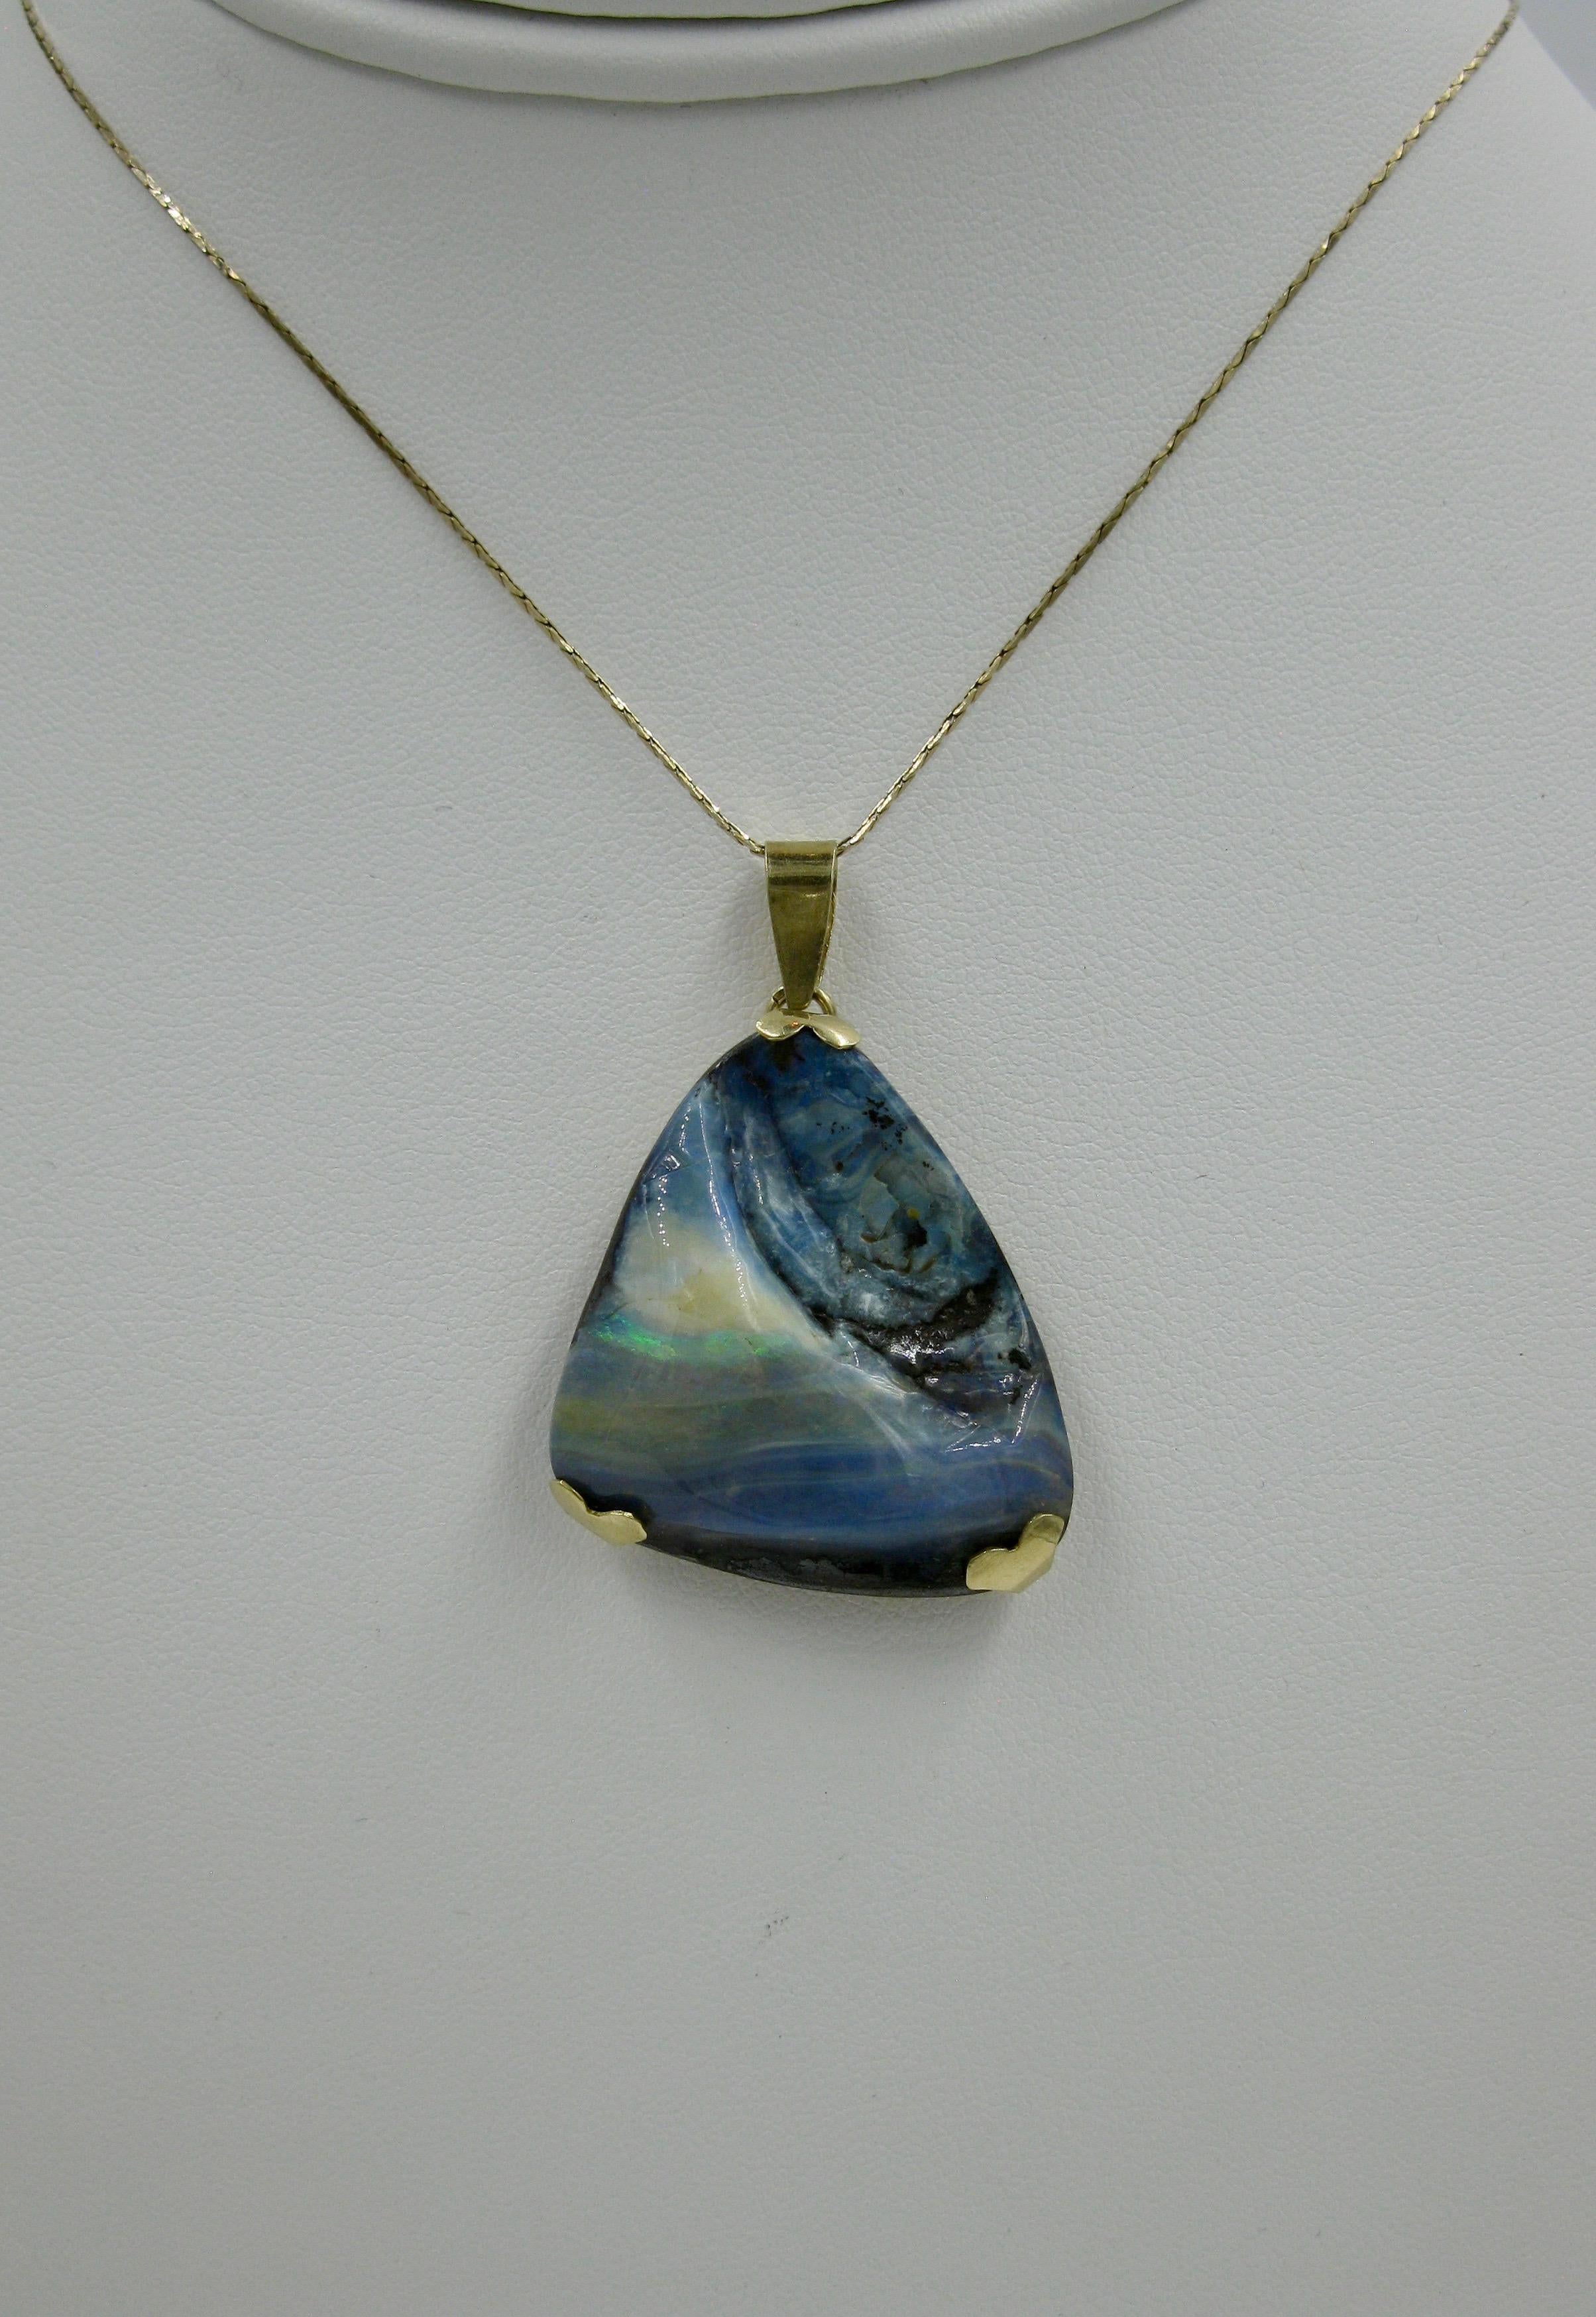 A spectacular Mid-Century Modern Boulder Opal Pendant set in 14 Karat Yellow Gold.  The opal has stunning blue, yellow, white and green colors.  A dramatic and wonderful opal!

The listing is only for the pendant.  The chain is only shown for